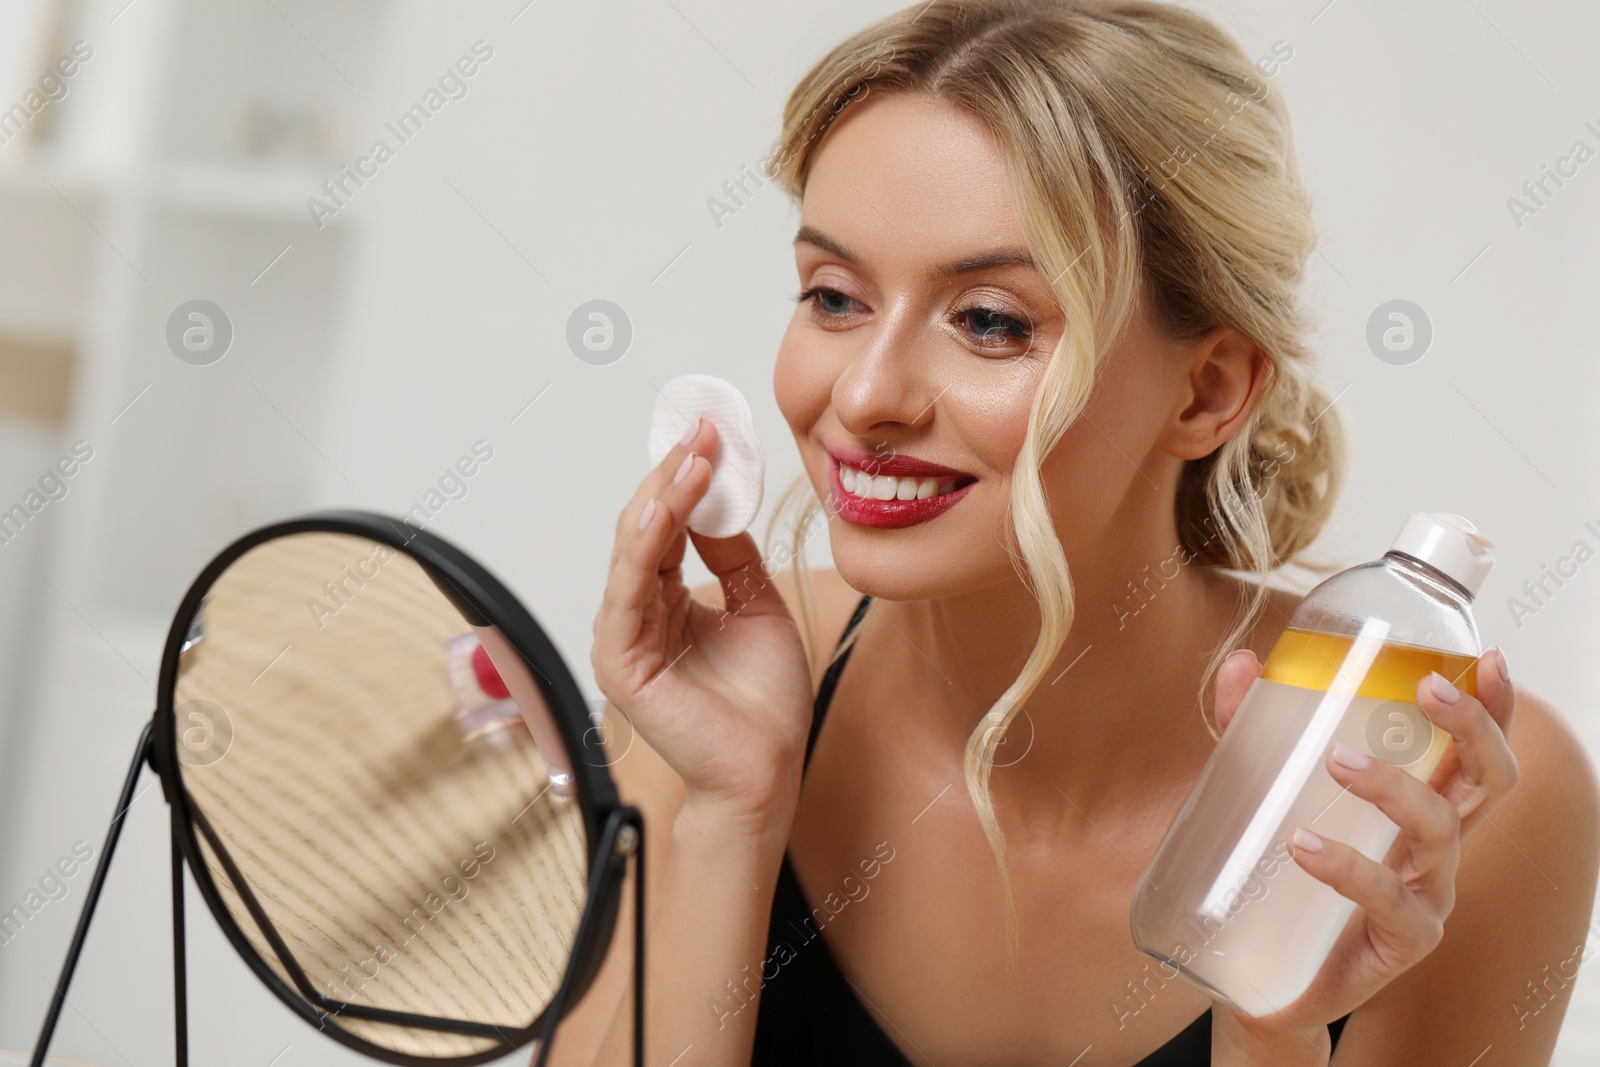 Photo of Smiling woman removing makeup with cotton pad in front of mirror indoors